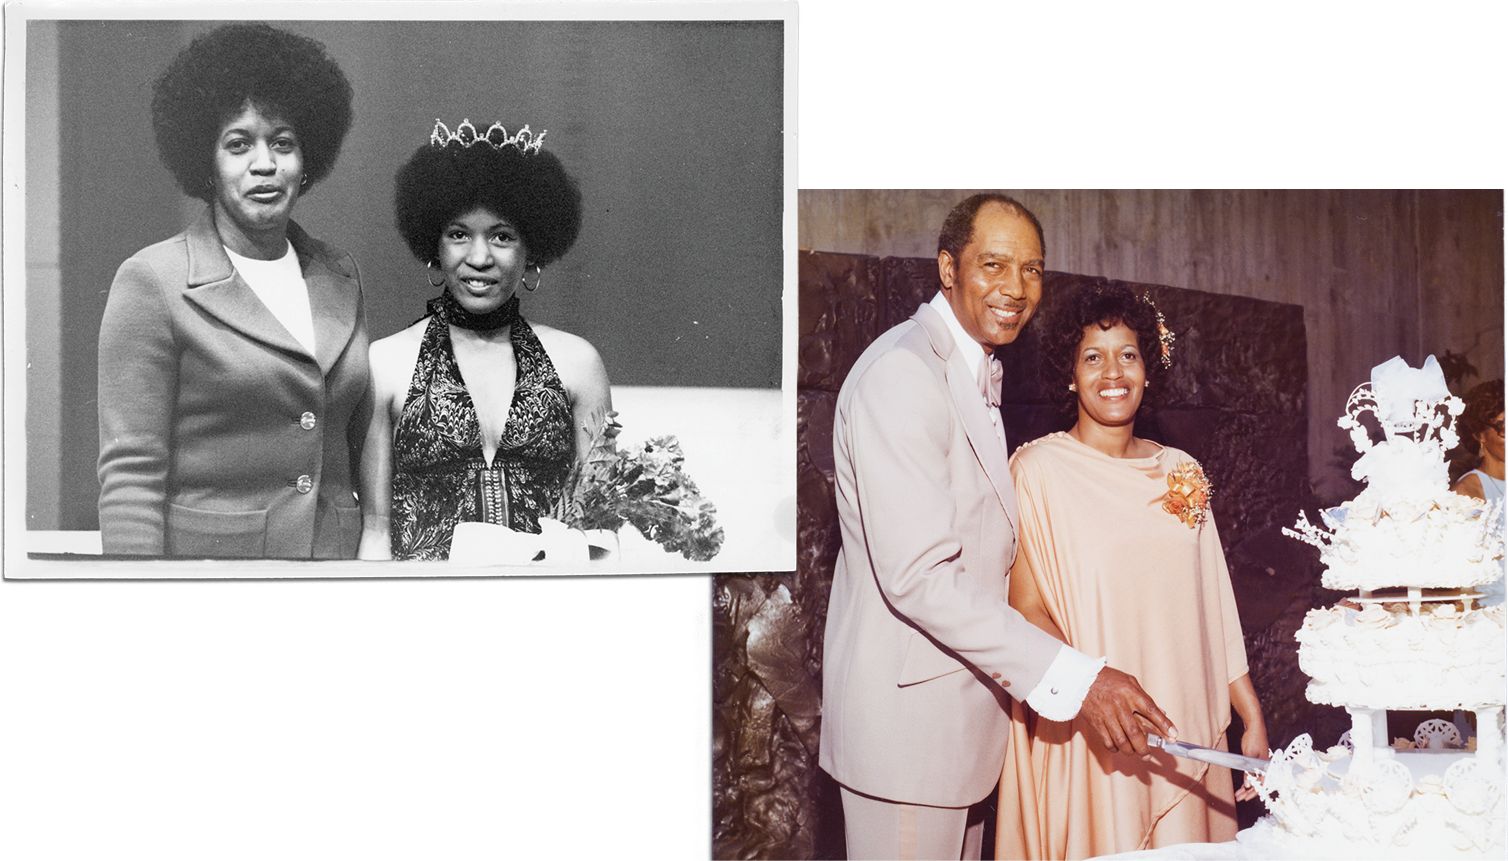 From left: Evers-Williams with daughter Reena, crowned “Miss Black Pearl” at Citrus College, April 1972. Evers-Williams with Walter Williams on their wedding day in 1976.